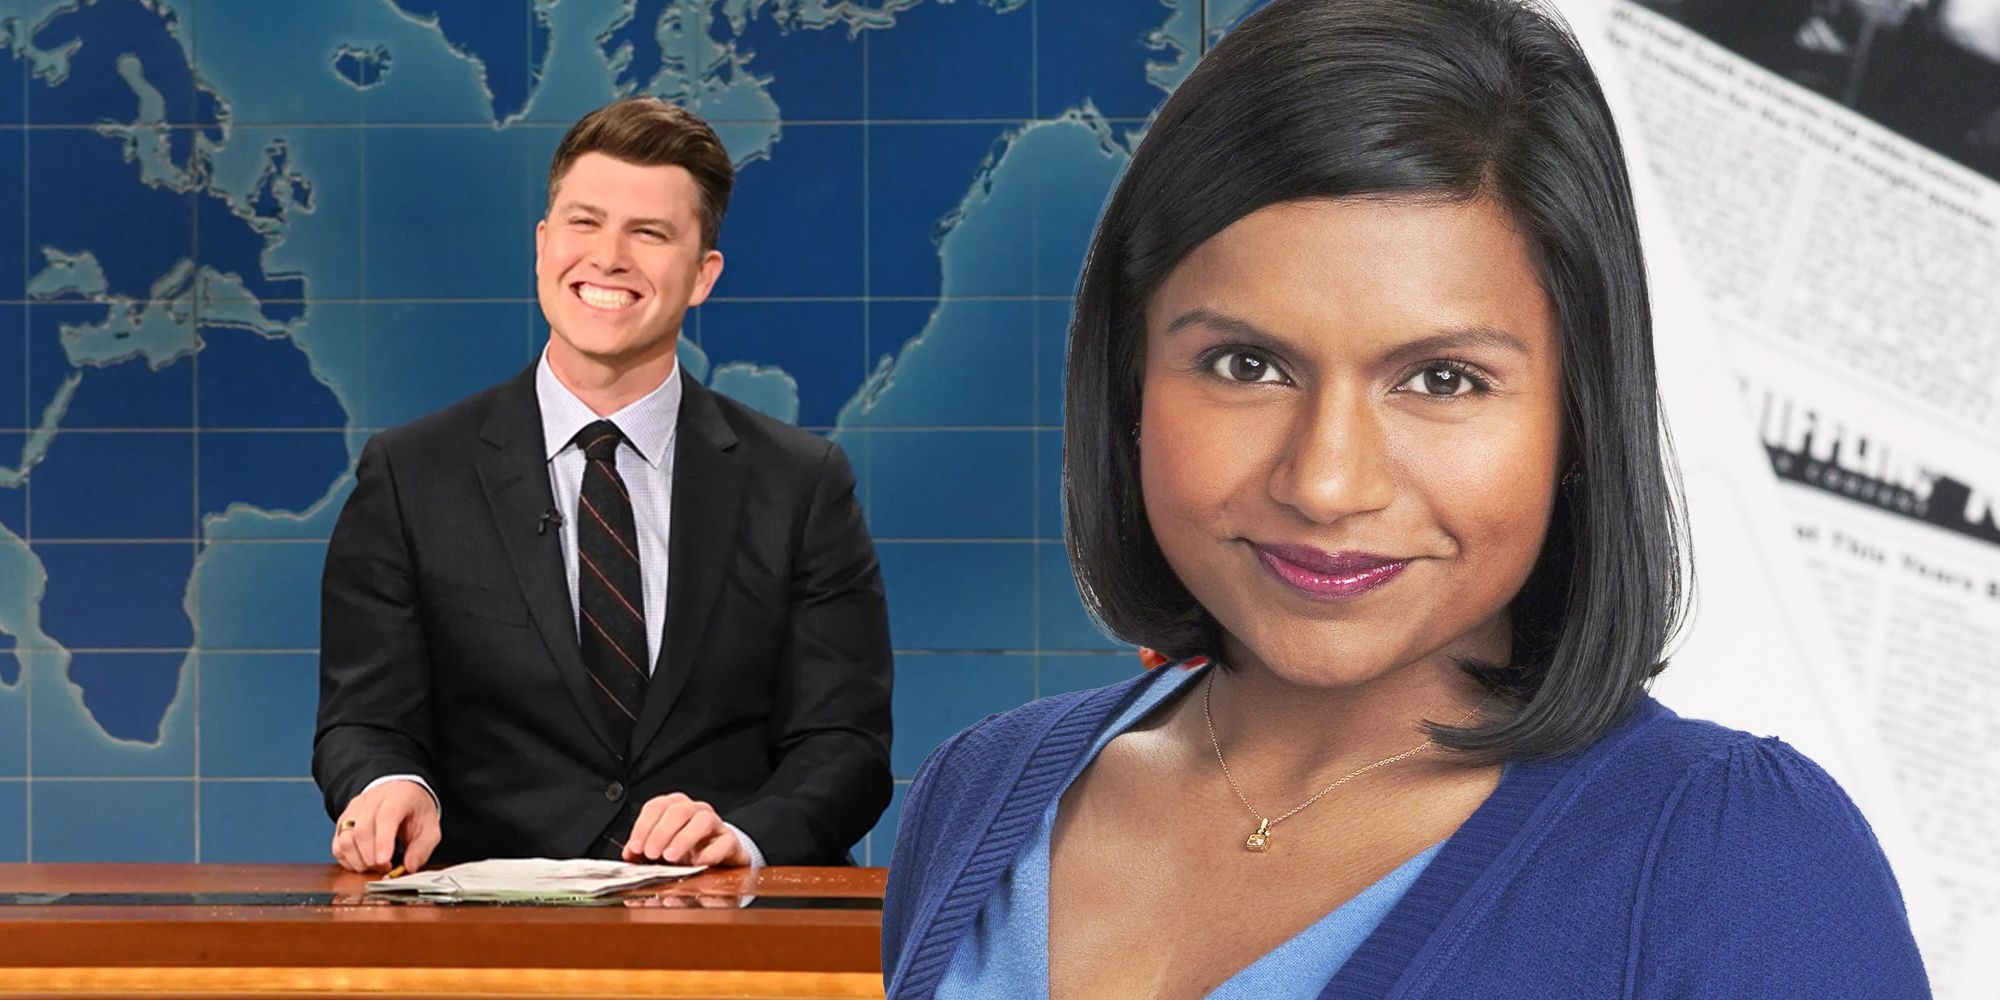 Mindy Kaling and SNL's Weekend Update